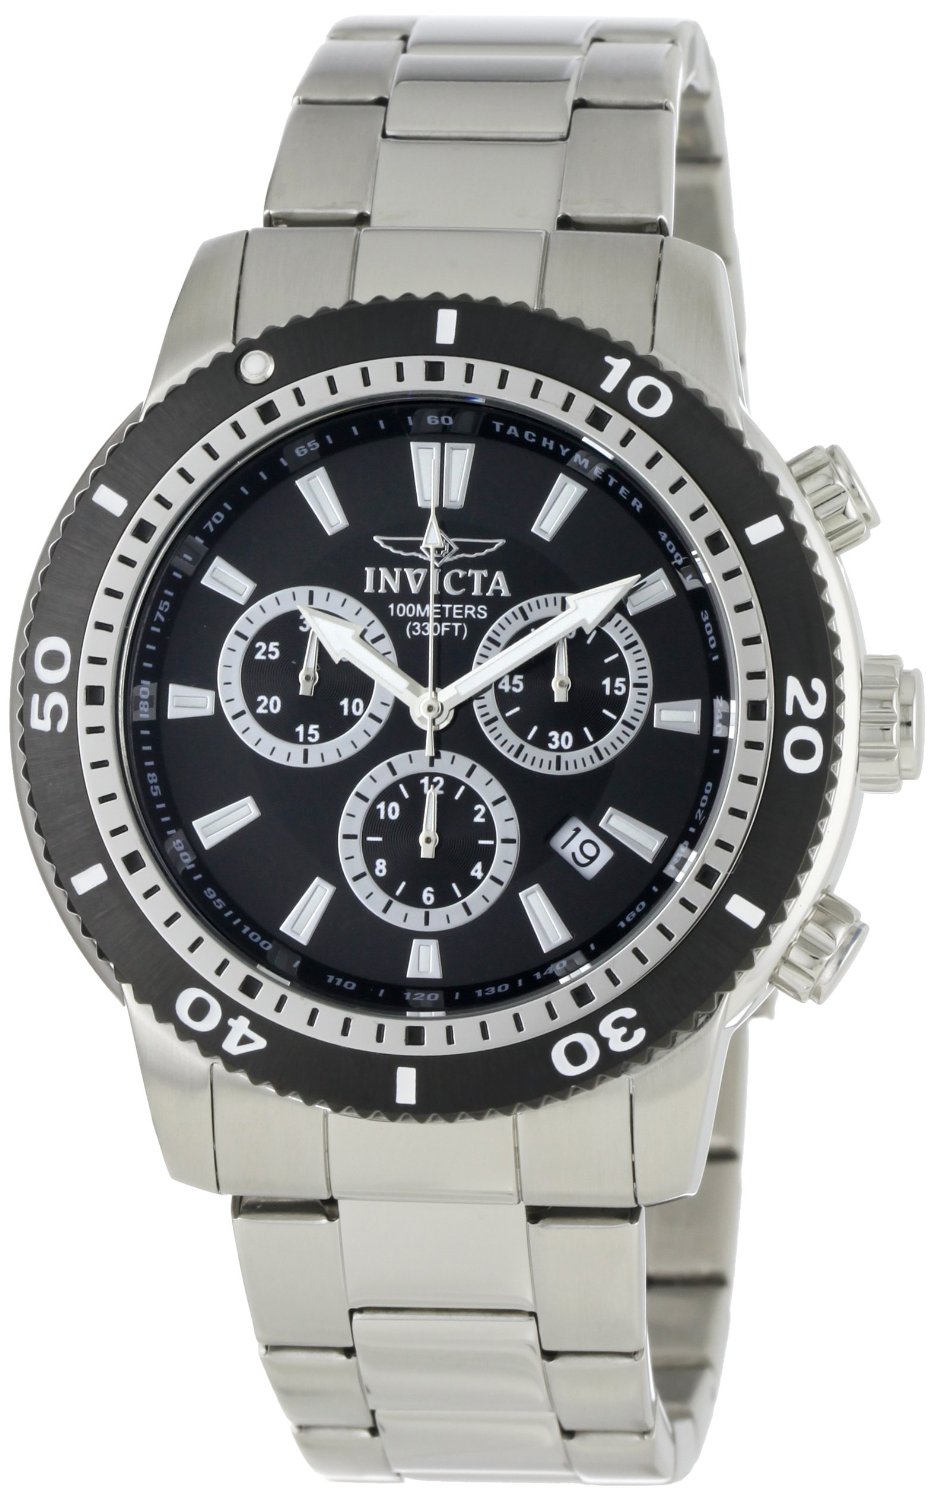 Invicta Men's 1203 II Collection Chronograph Stainless Steel Watch $59.99+free shipping